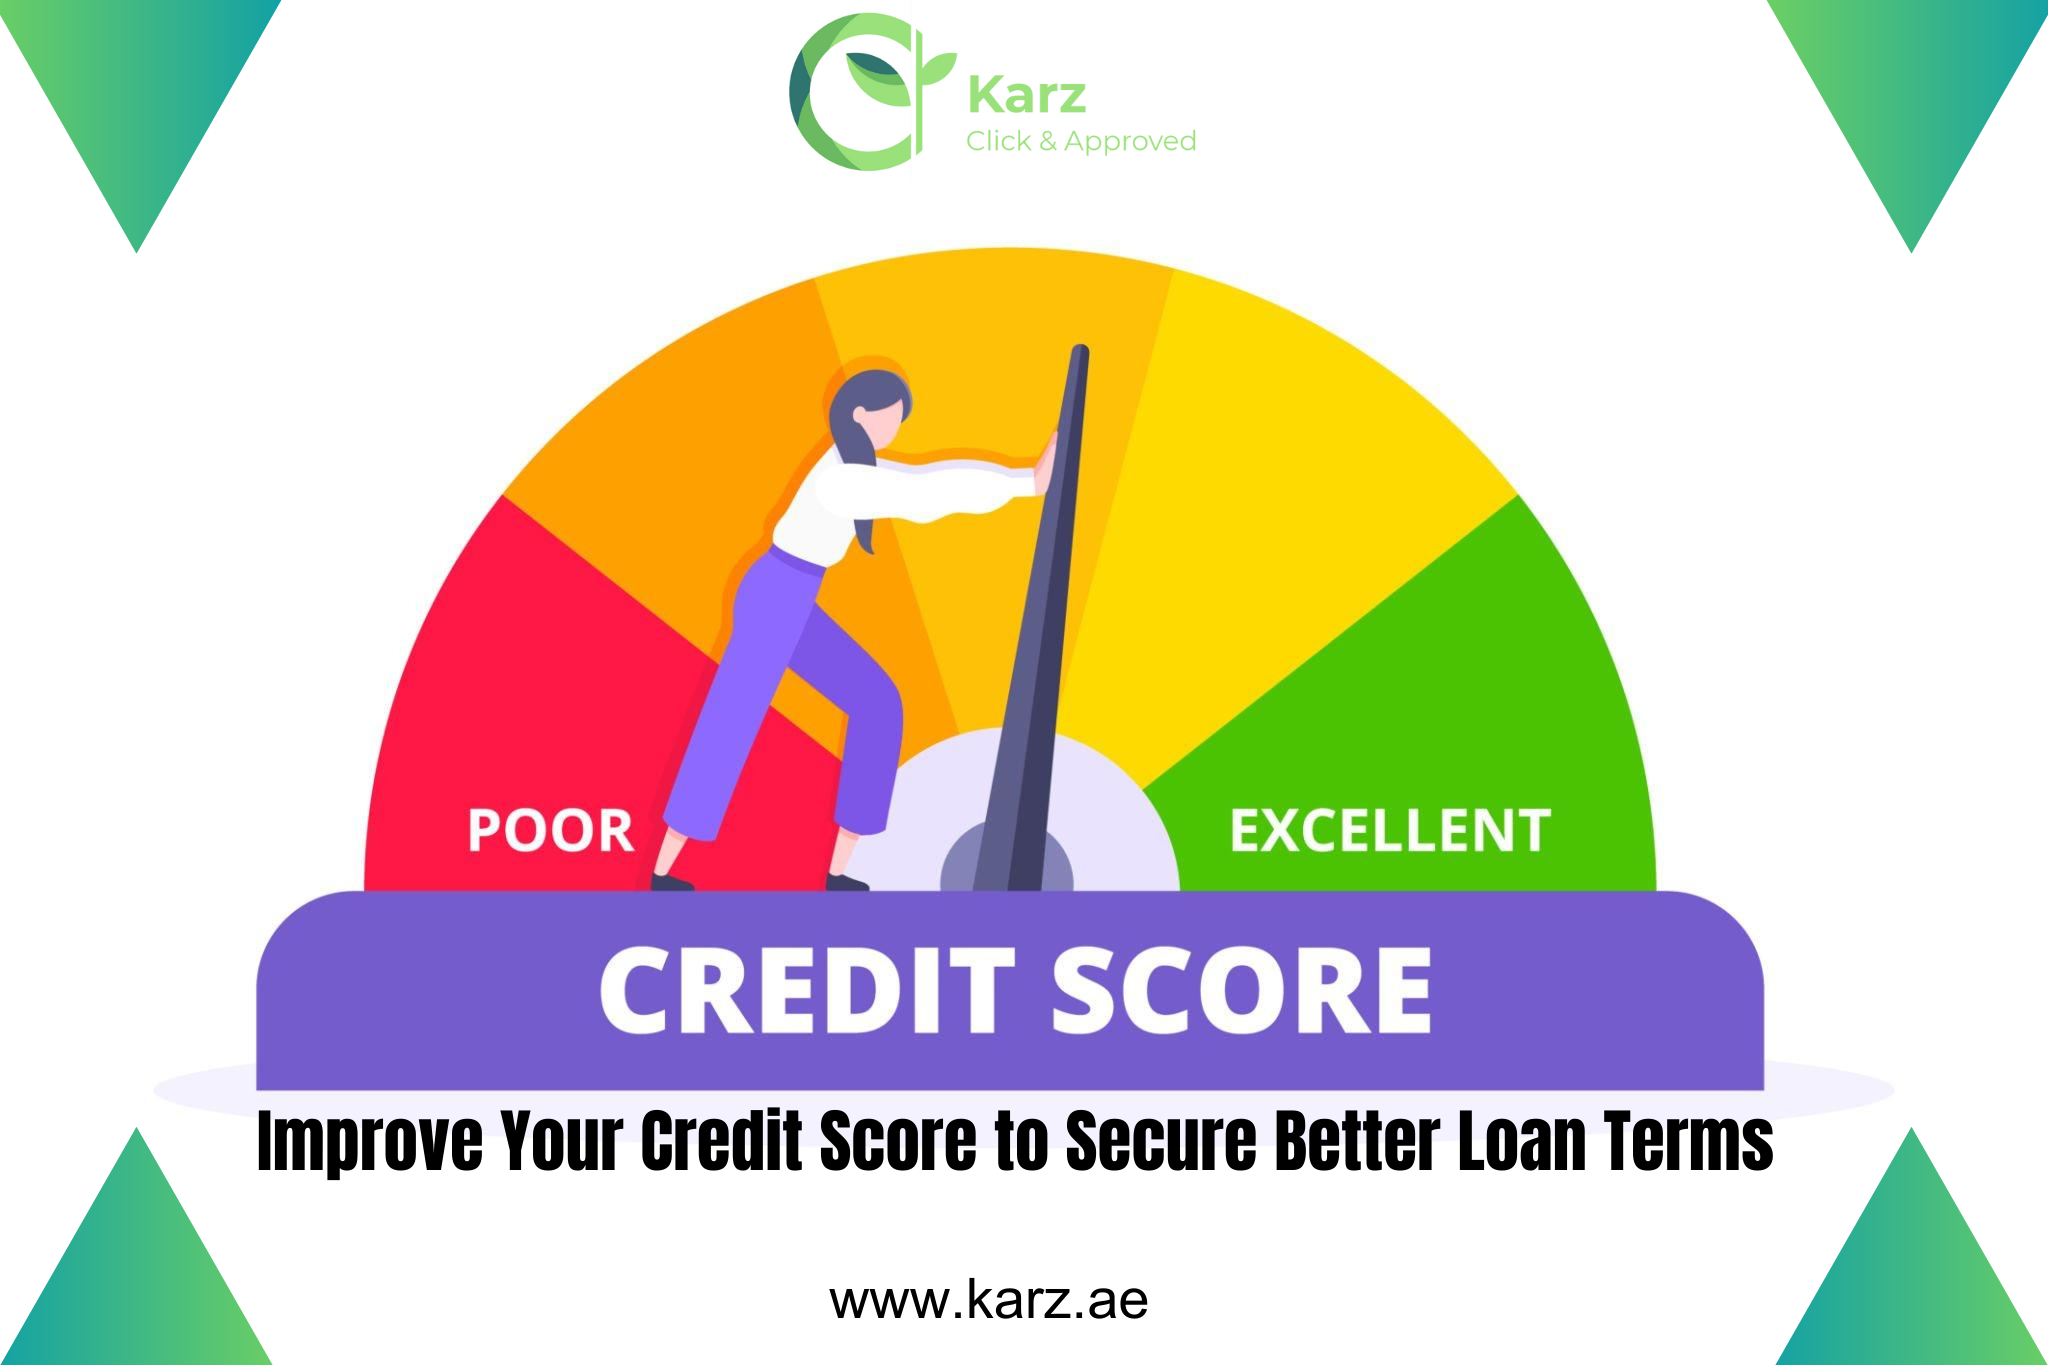 Improve Your Credit Score to Secure Better Loan Terms